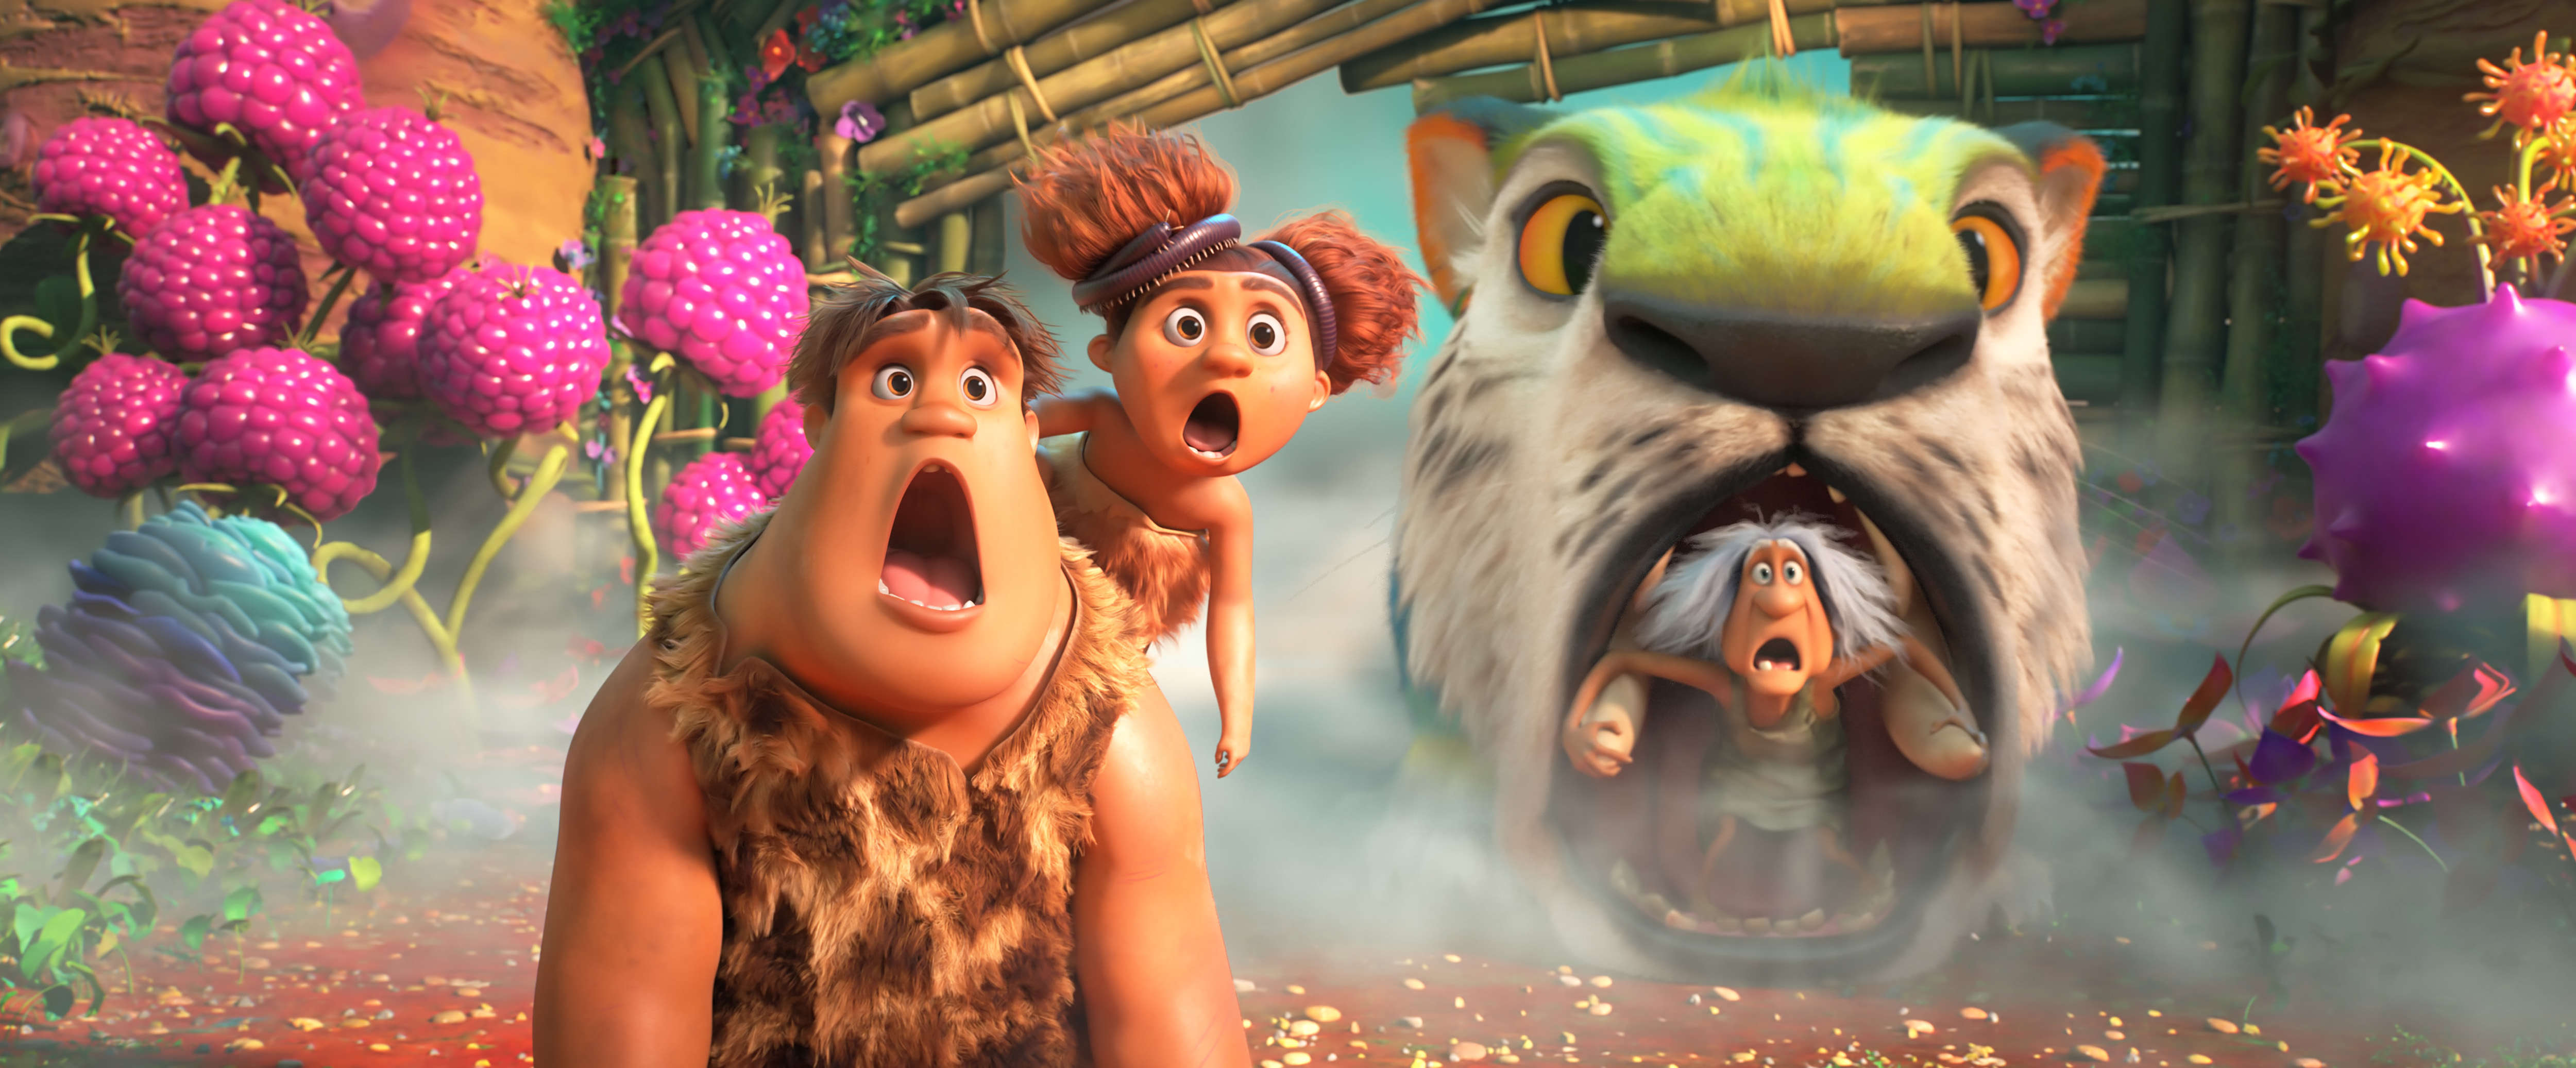 The Croods A New Age Still